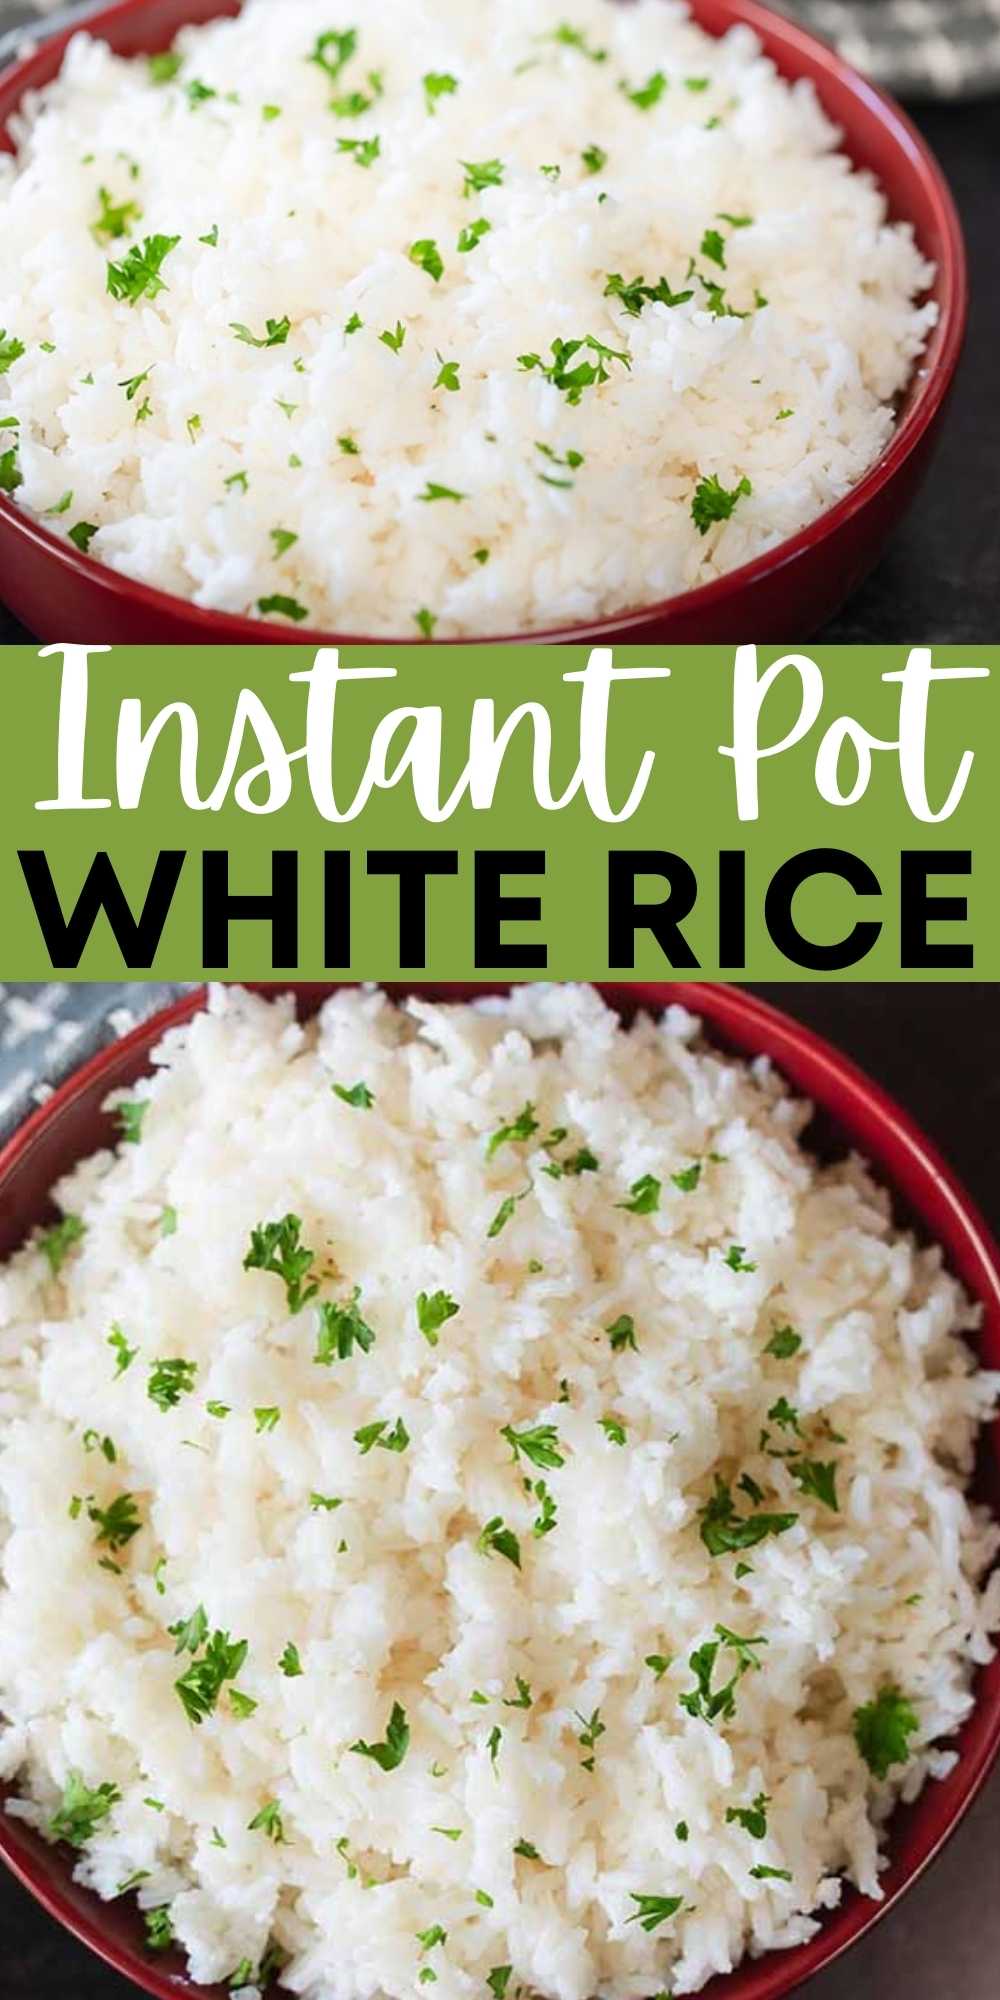 Instant pot white rice is so easy and a great way to make a large quantity of rice. We do this all the time to freeze, meal plan and more. You’ll love this simple pressure cooker white rice recipe. #eatingonadime #instantpotrecipes #ricerecipes #pressurecookerrecipes 
